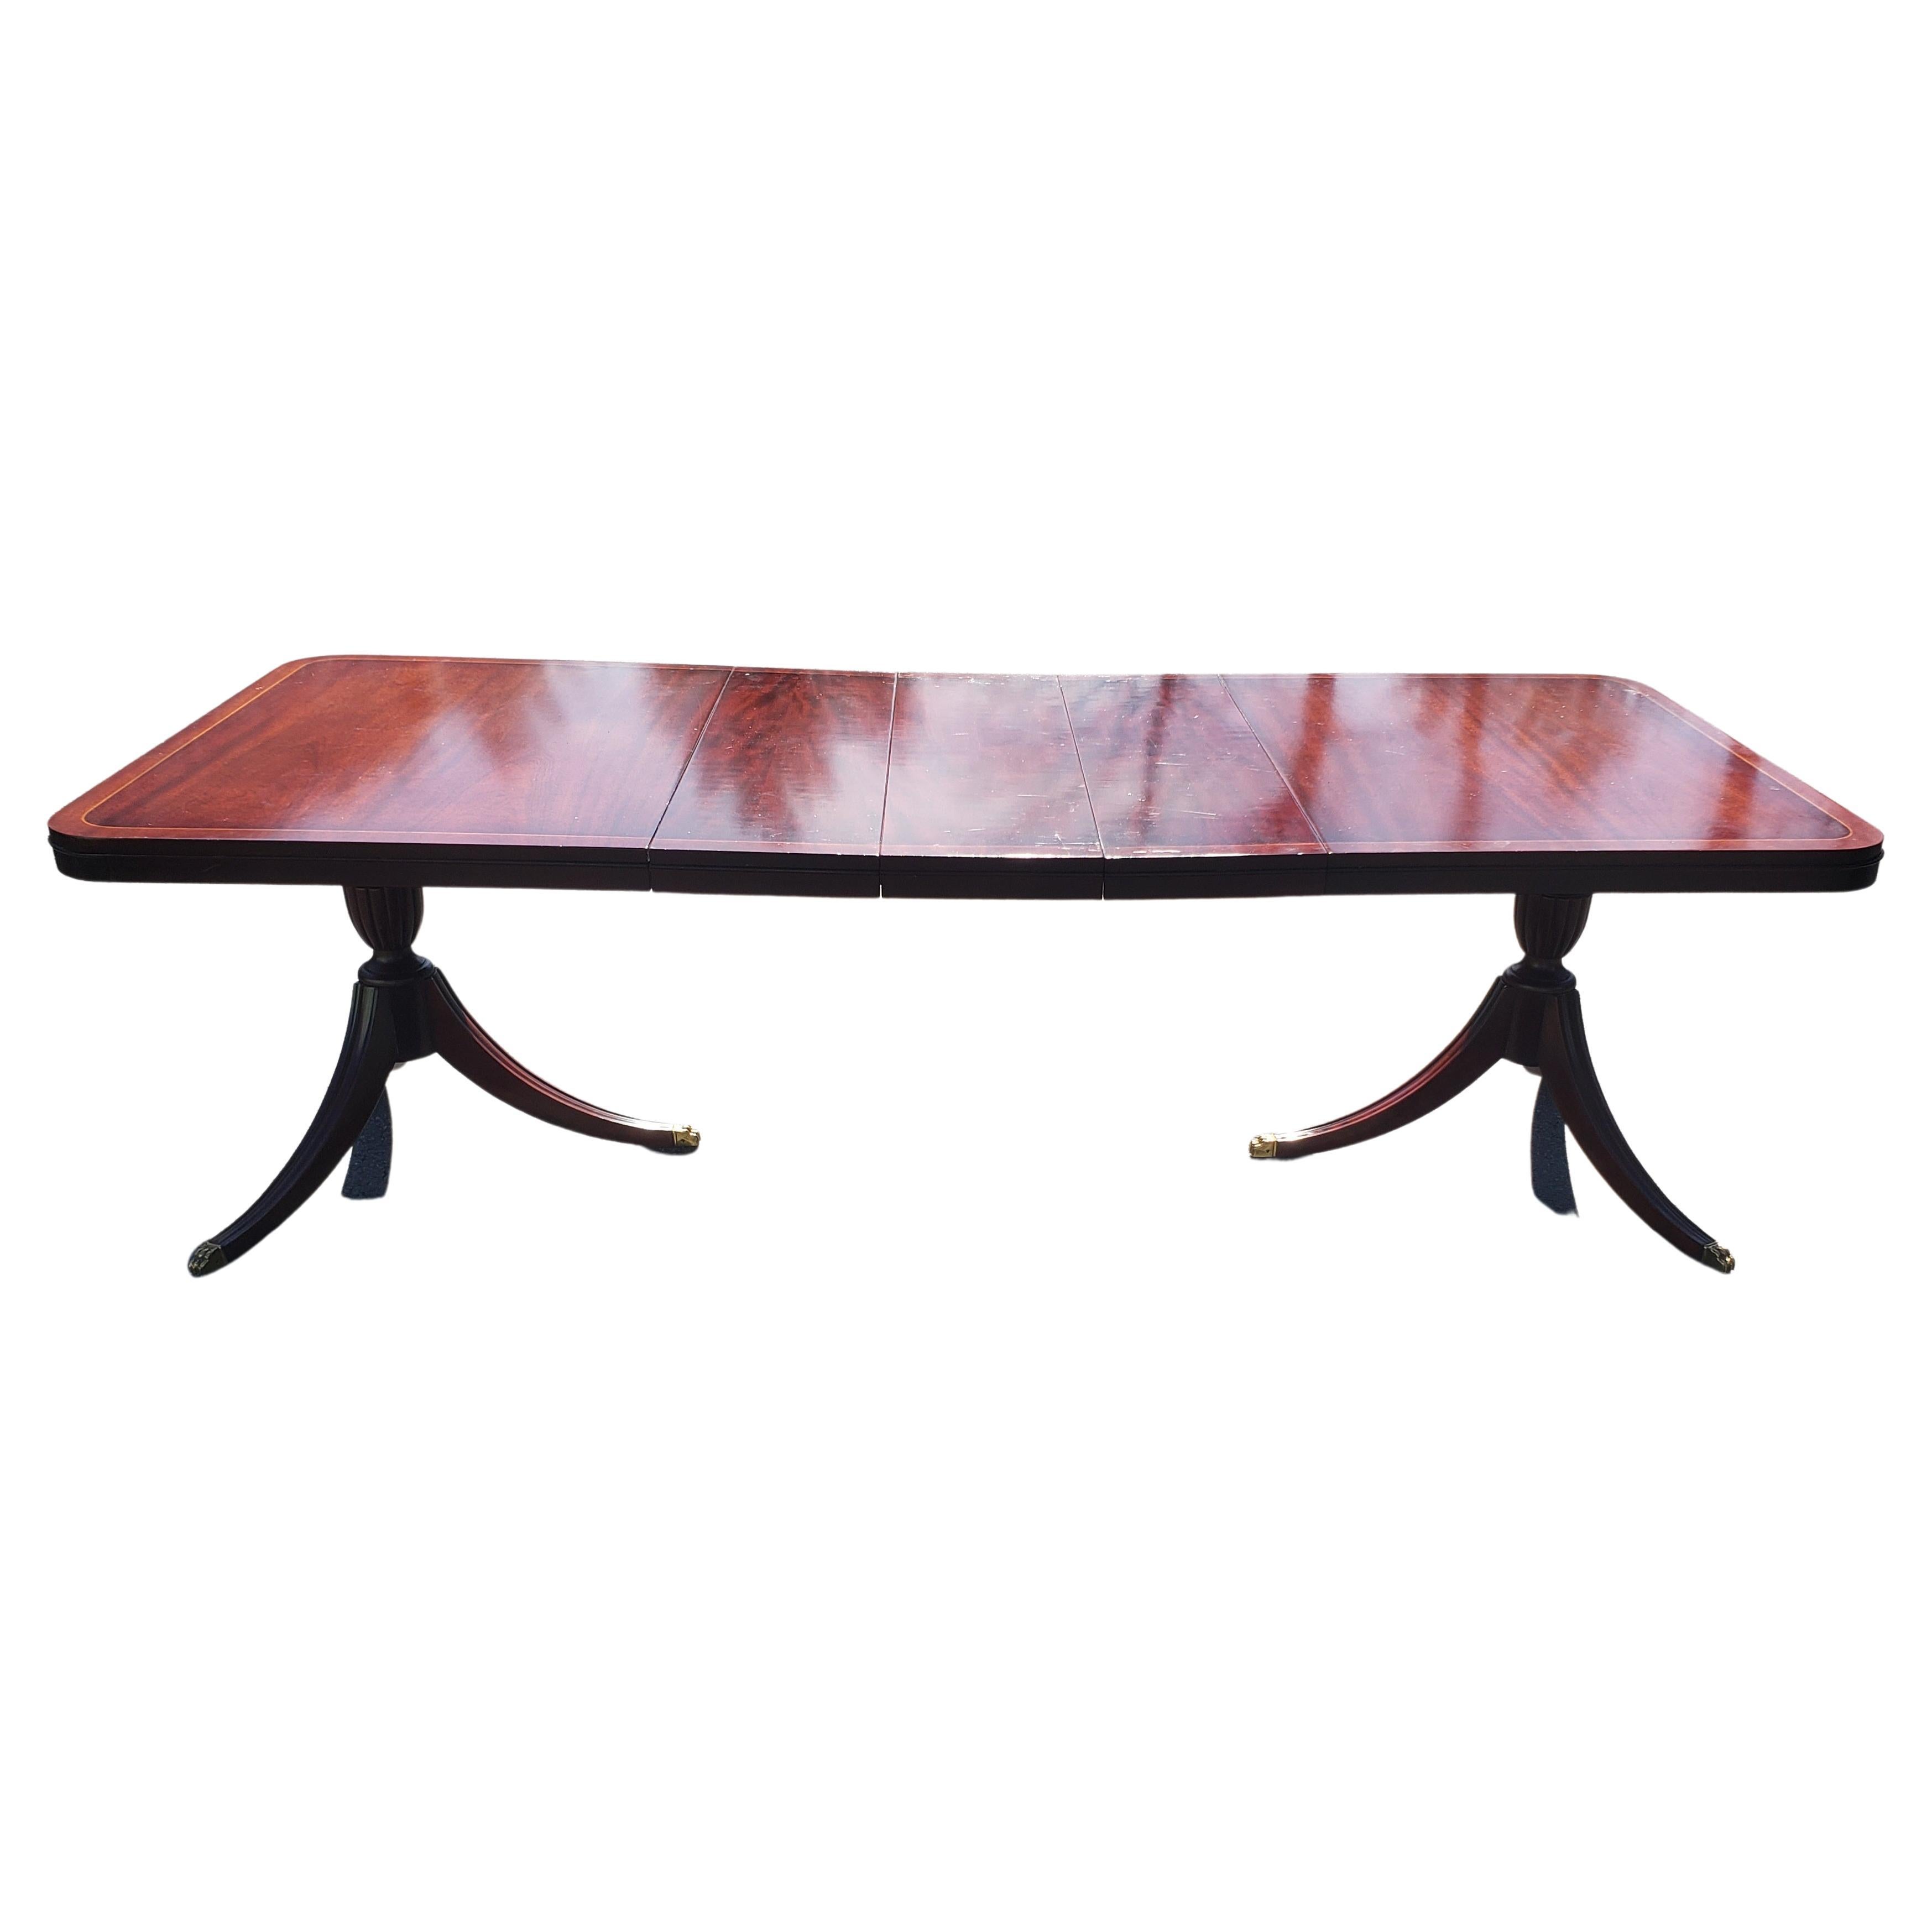 Inlay Regency Crossbanded Mahogany Satinwood Double Pedestal Extension Dining Table For Sale